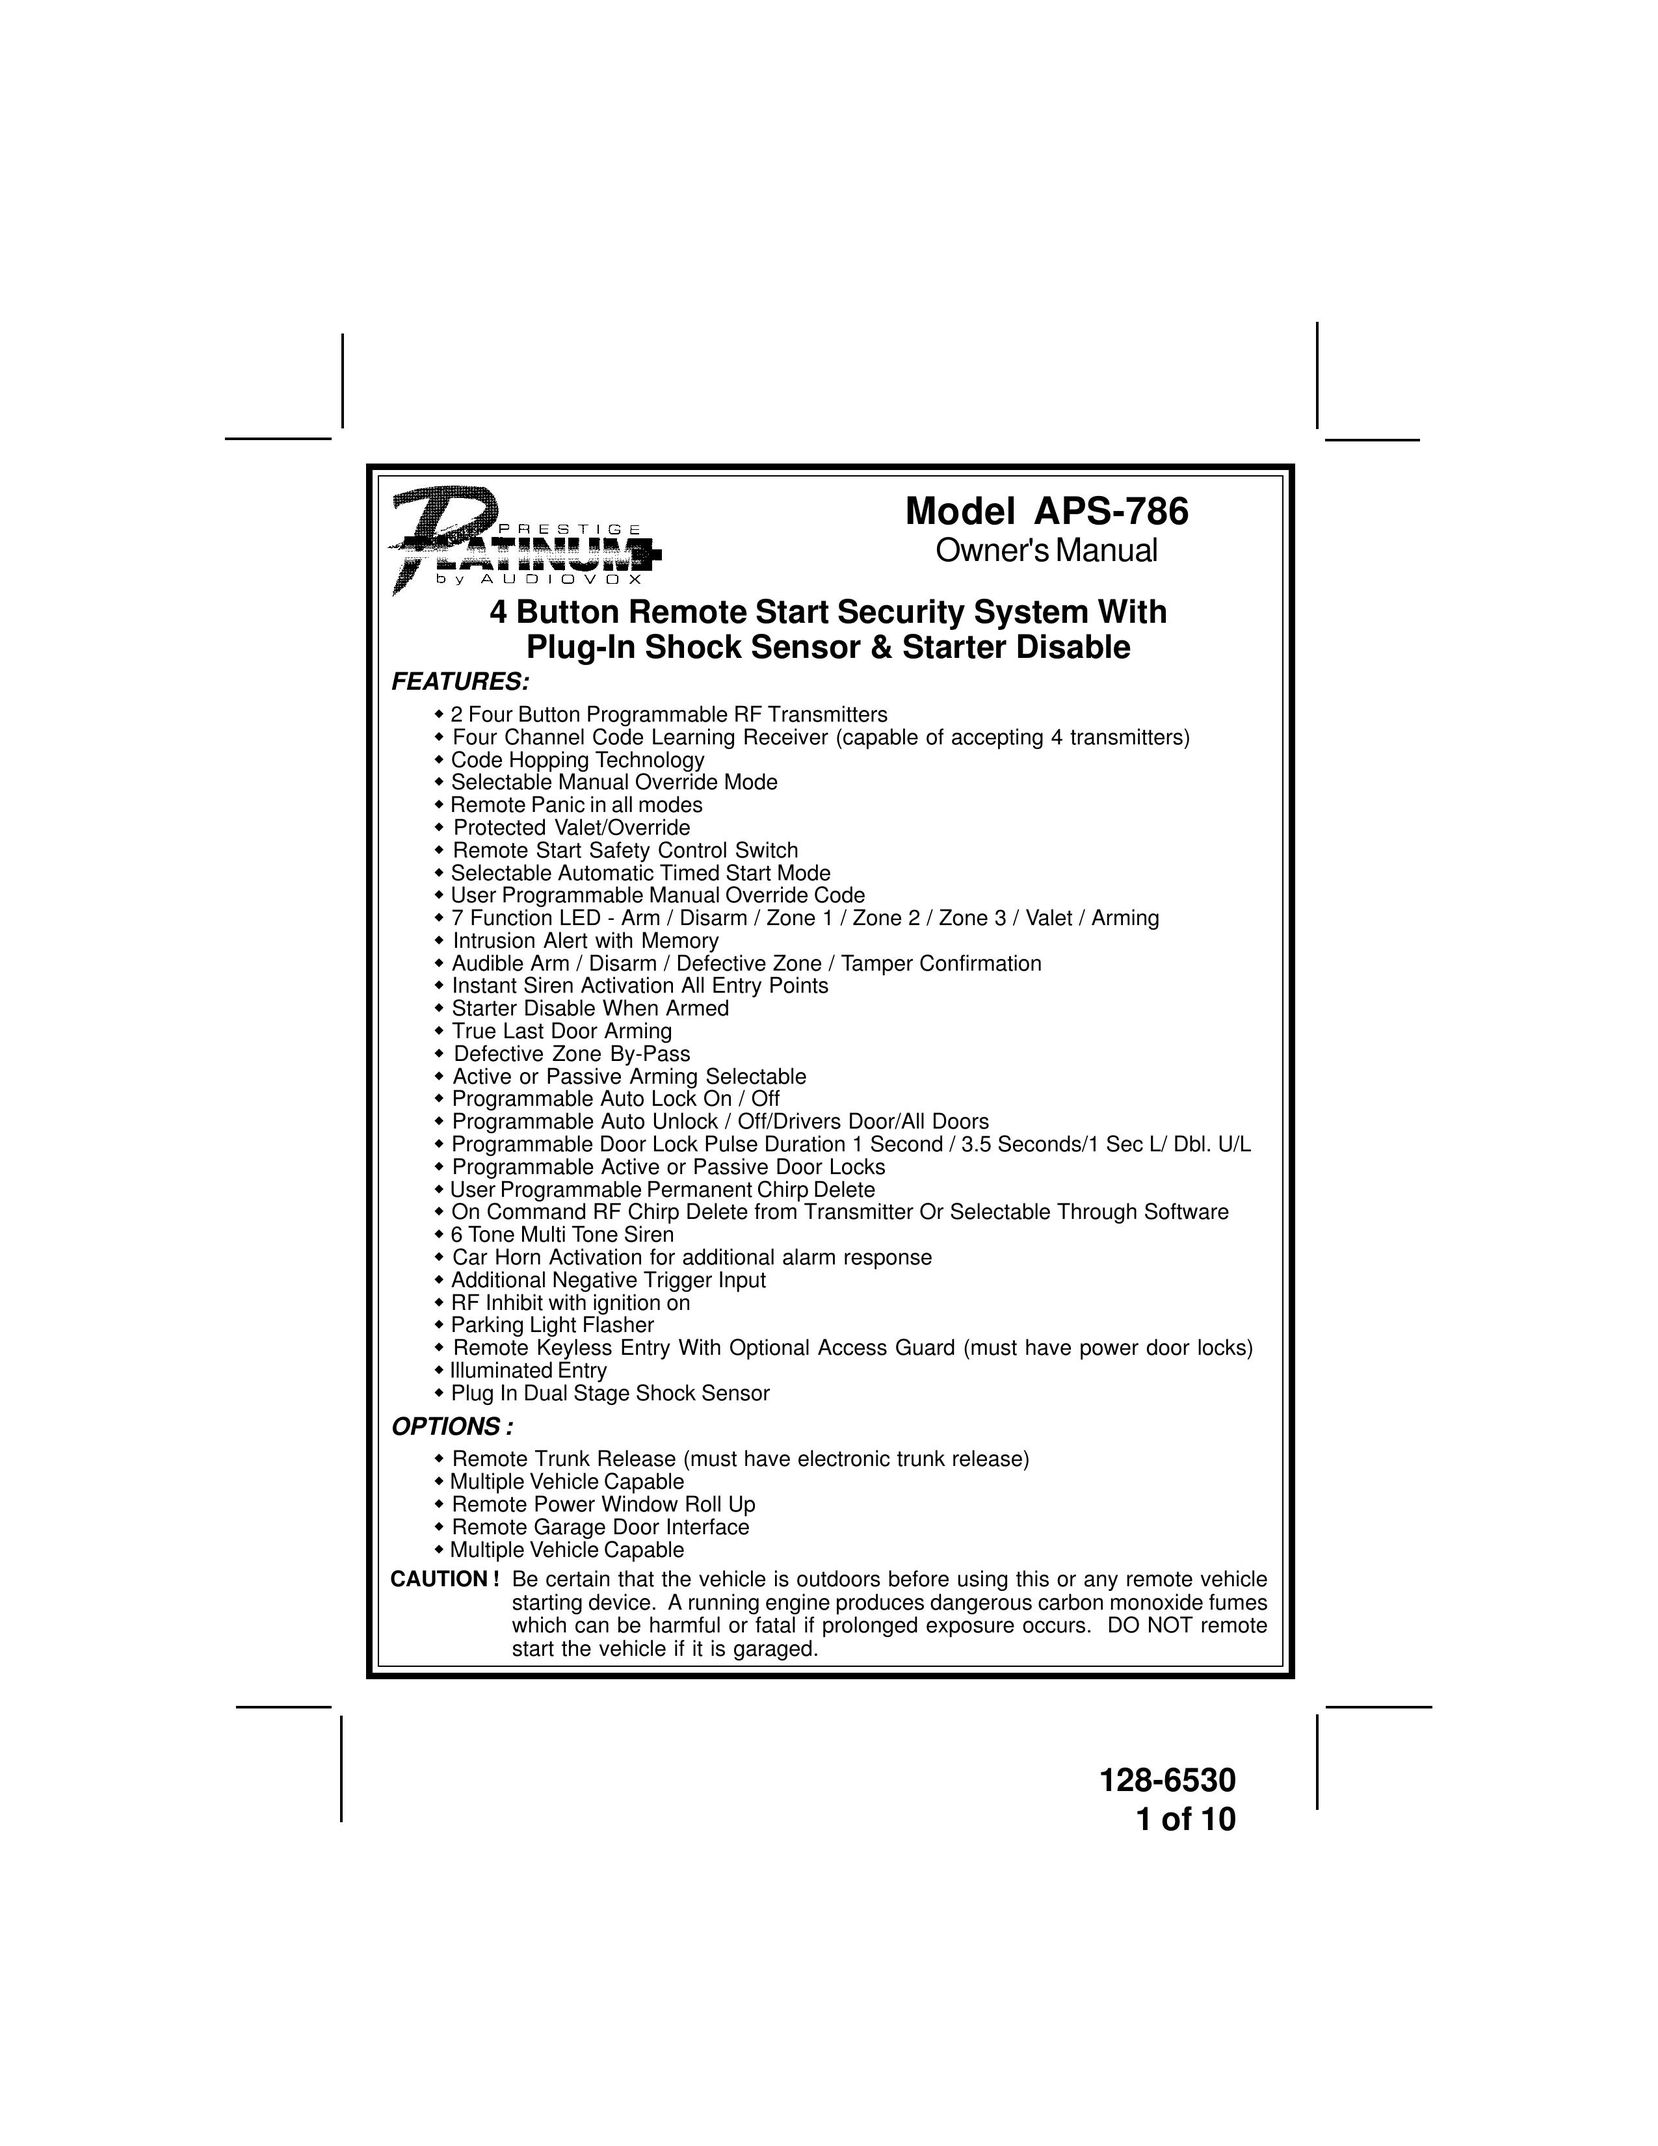 Audiovox APS-786 Home Security System User Manual